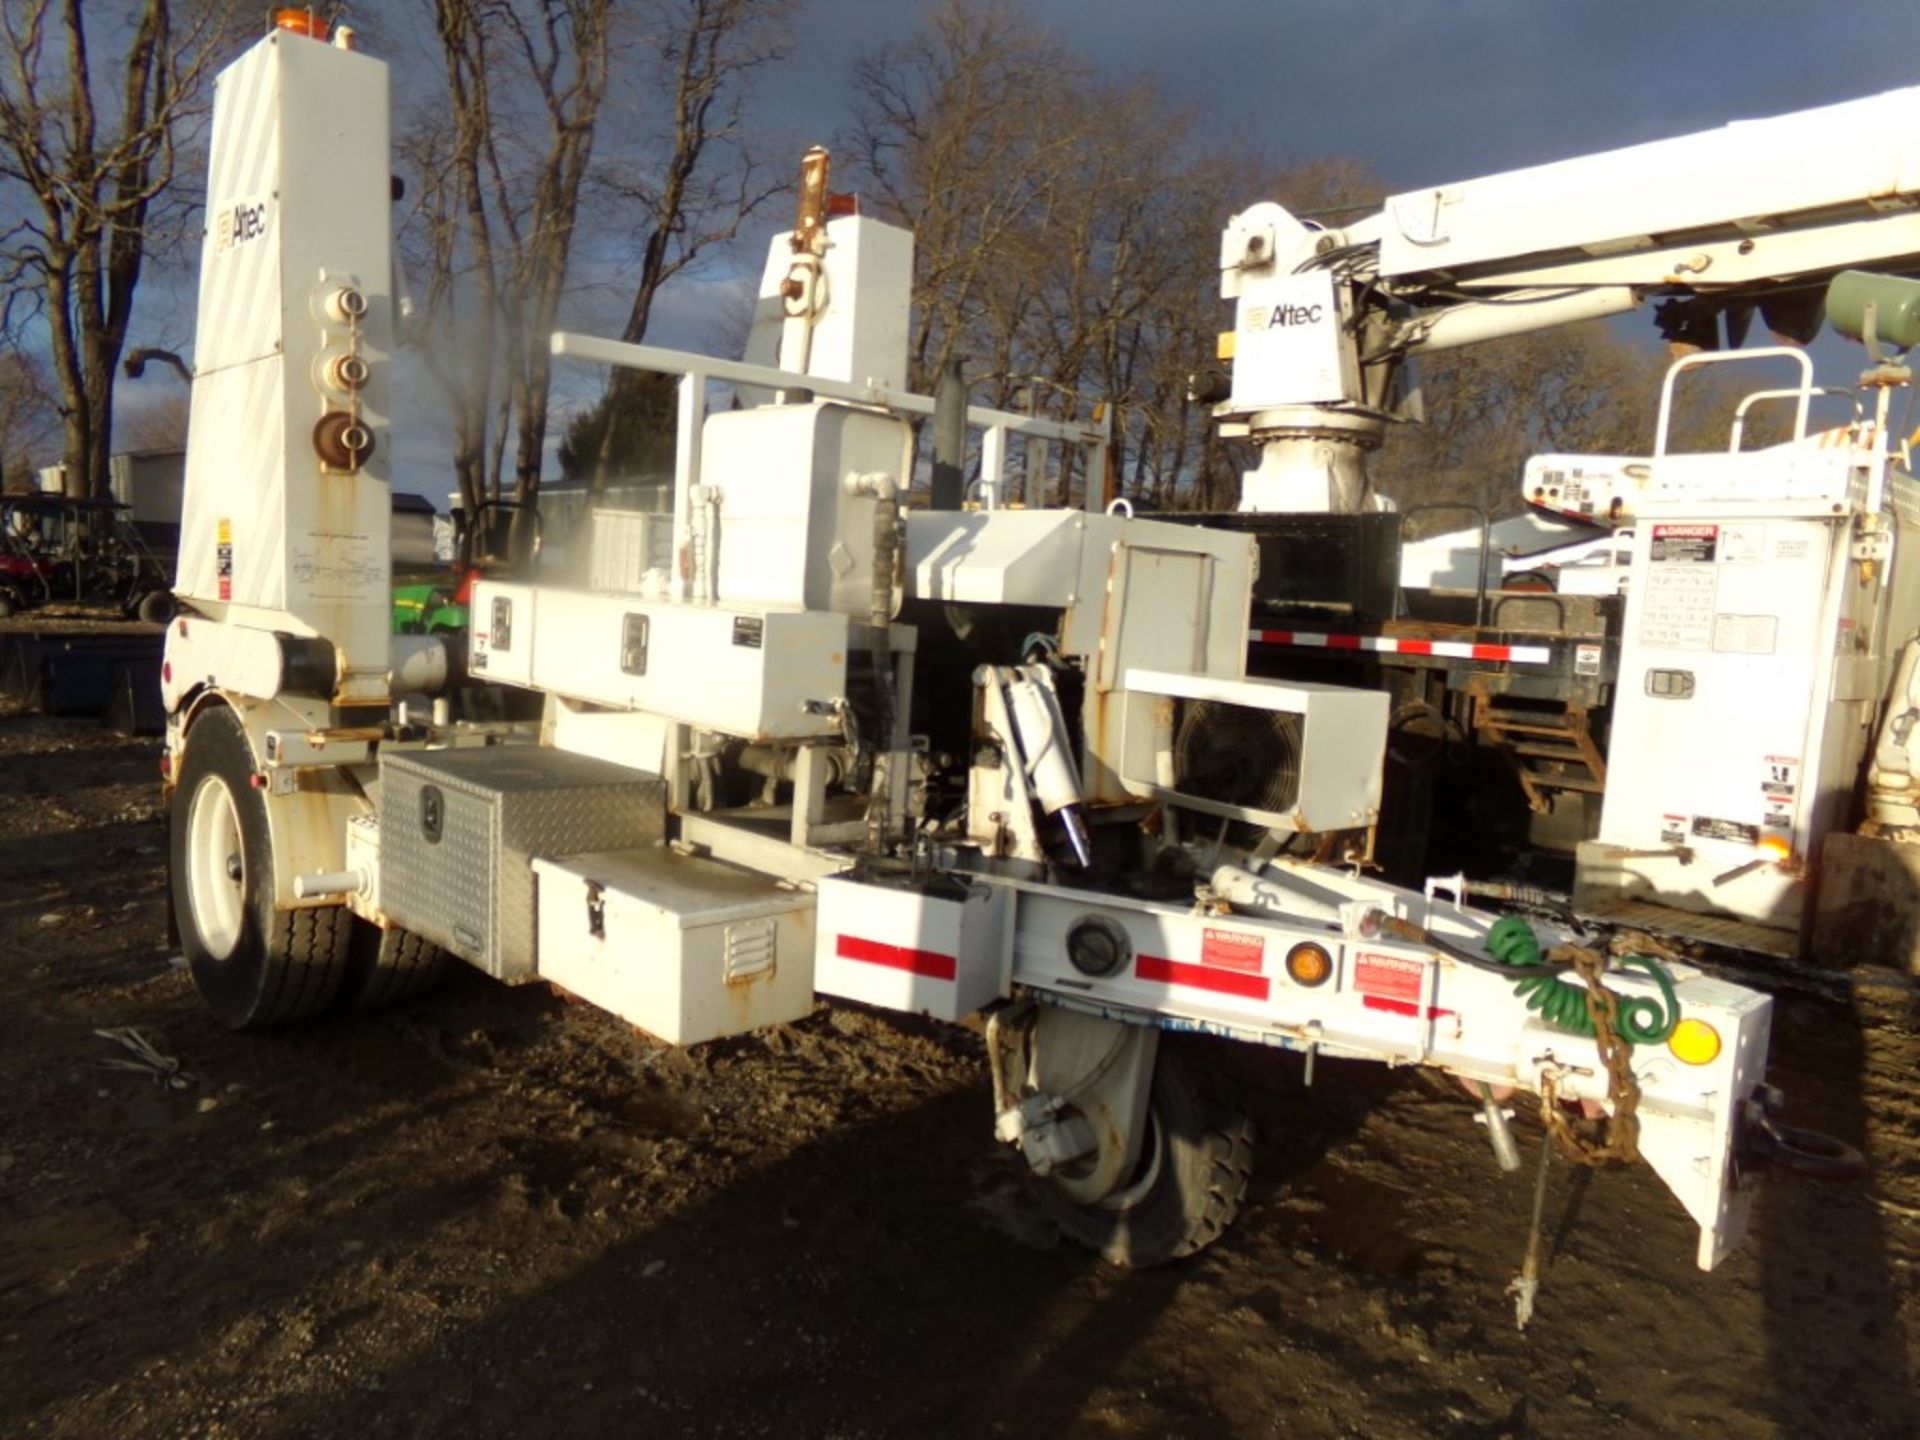 2007 Altec AD-108 Spool Trailer, With Diesel Engine, Pintle Hitch, Air Brakes, Single Axle, Vin #: - Image 4 of 4